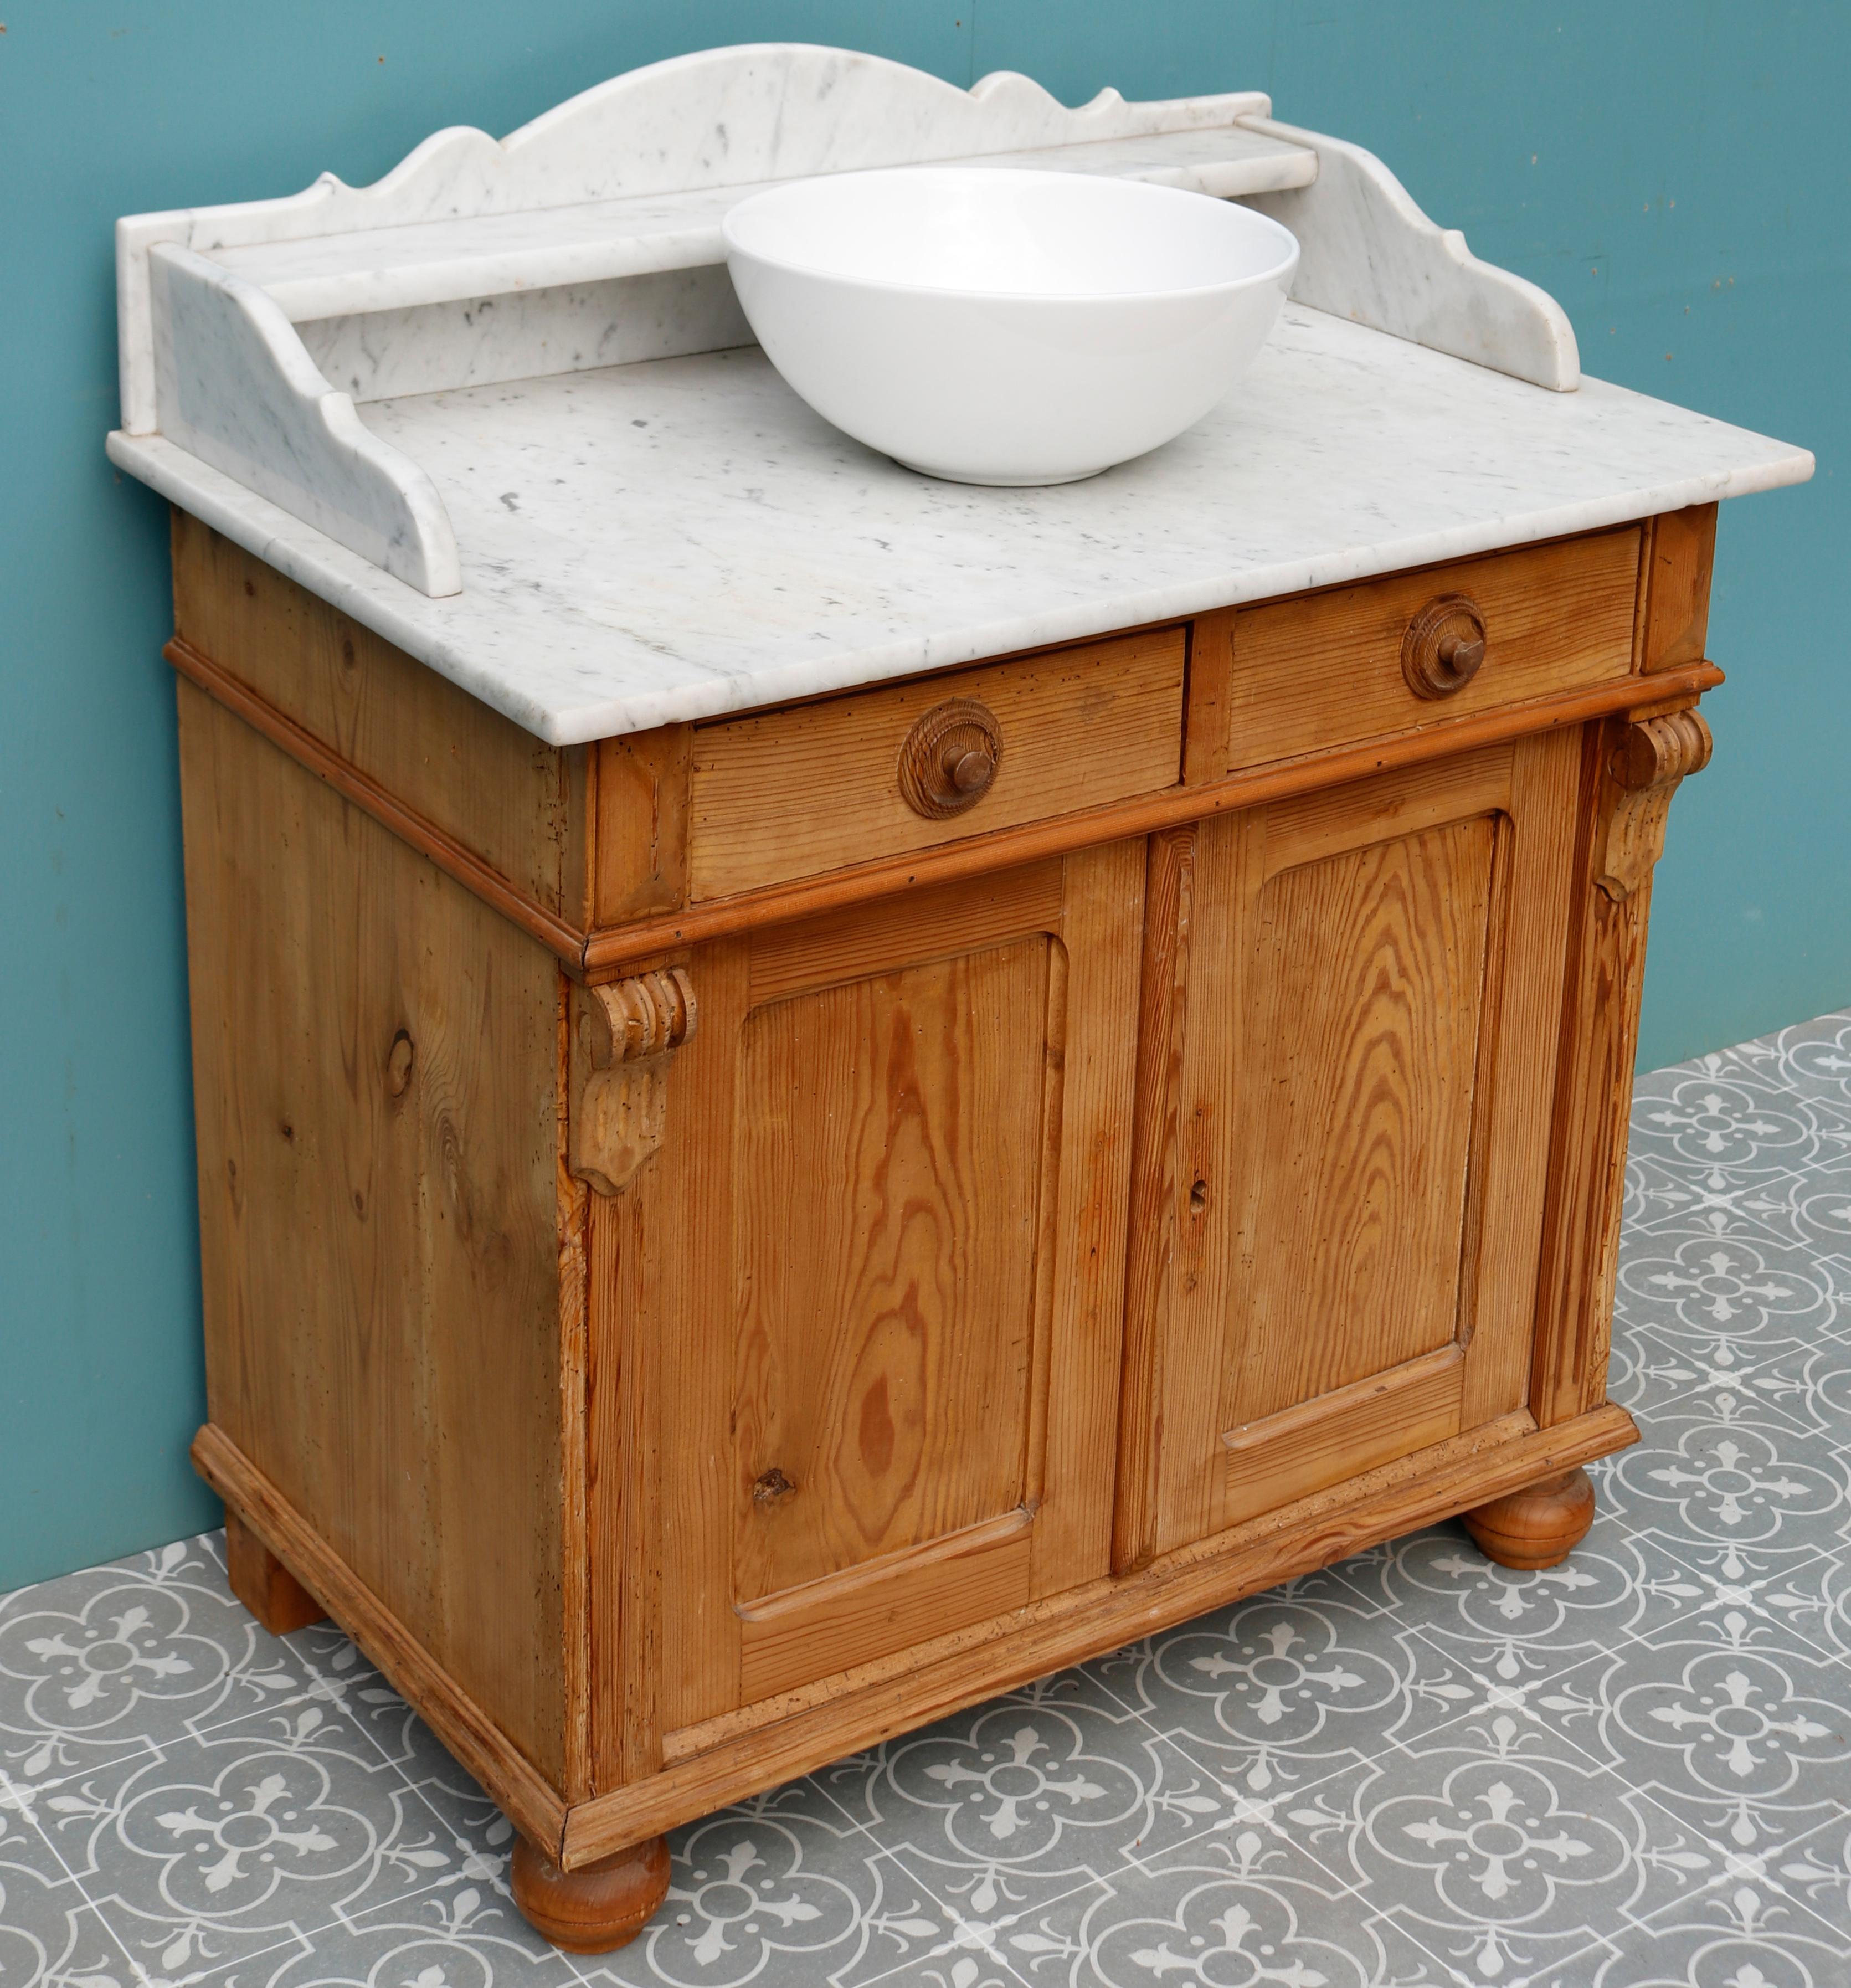 Victorian Style Carrara Marble Wash Basin In Good Condition For Sale In Wormelow, Herefordshire